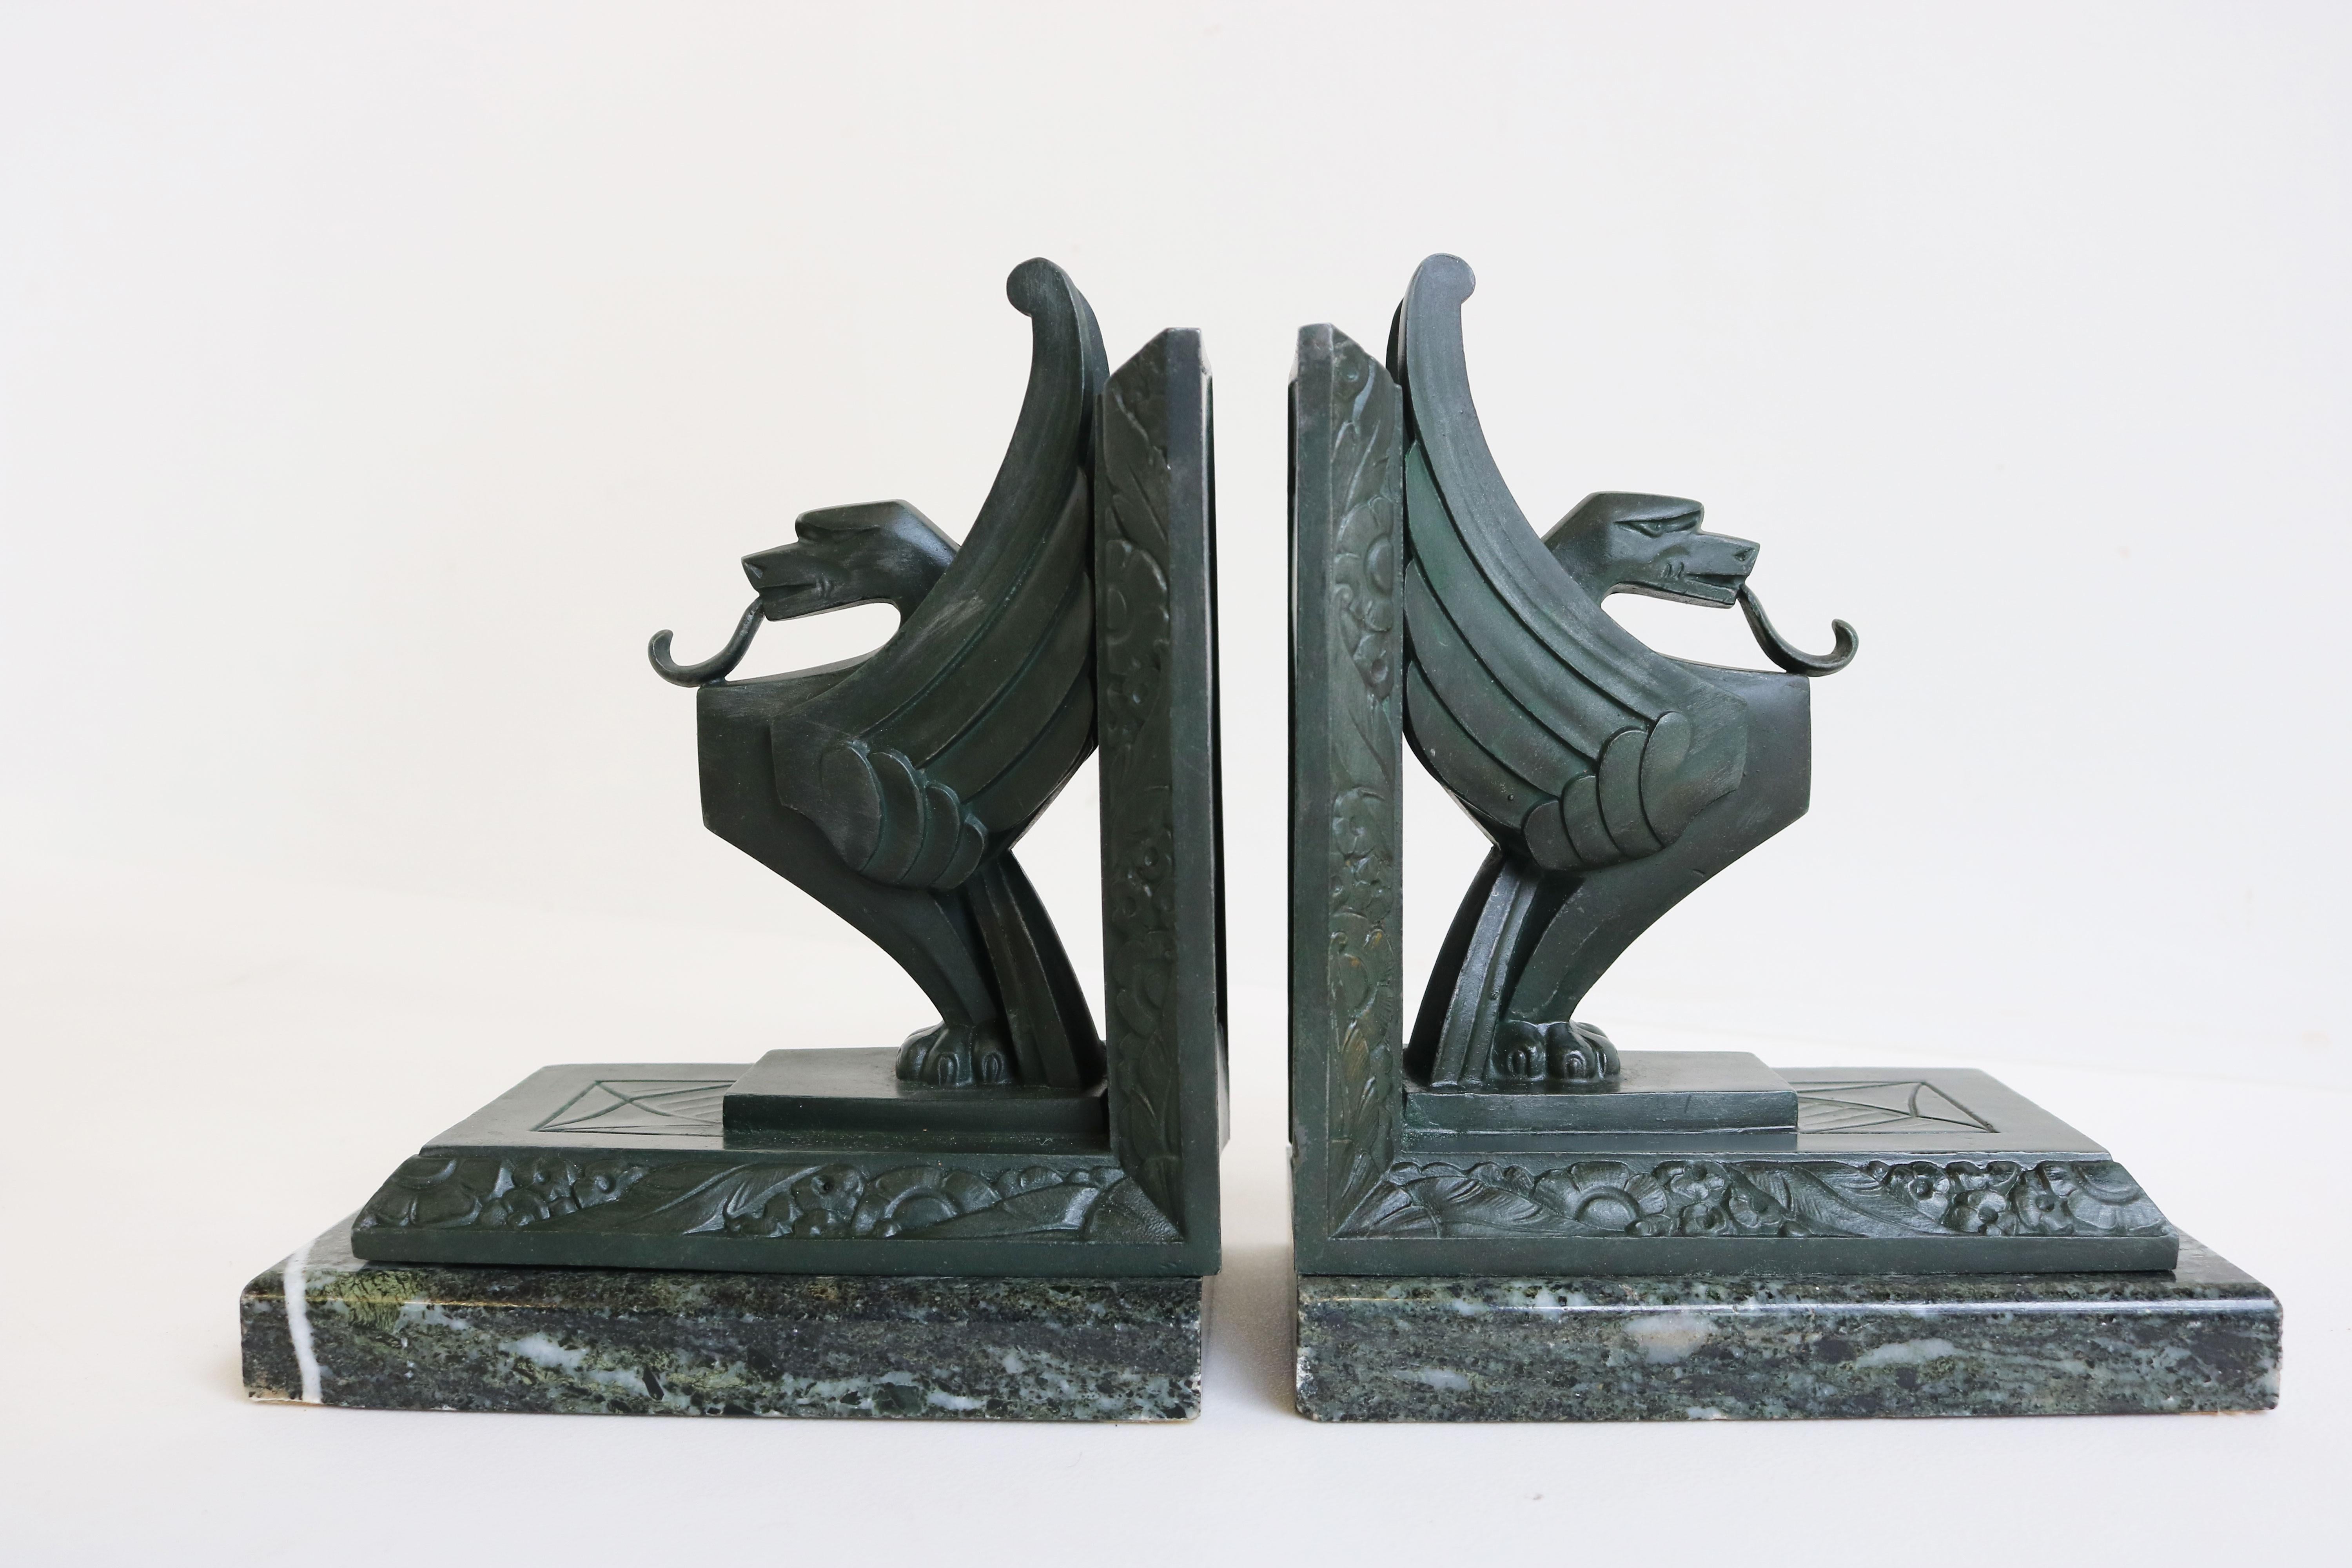 Antique French Art Deco Bookends “Griffins” by Limousin France 1930 Green Marble 6